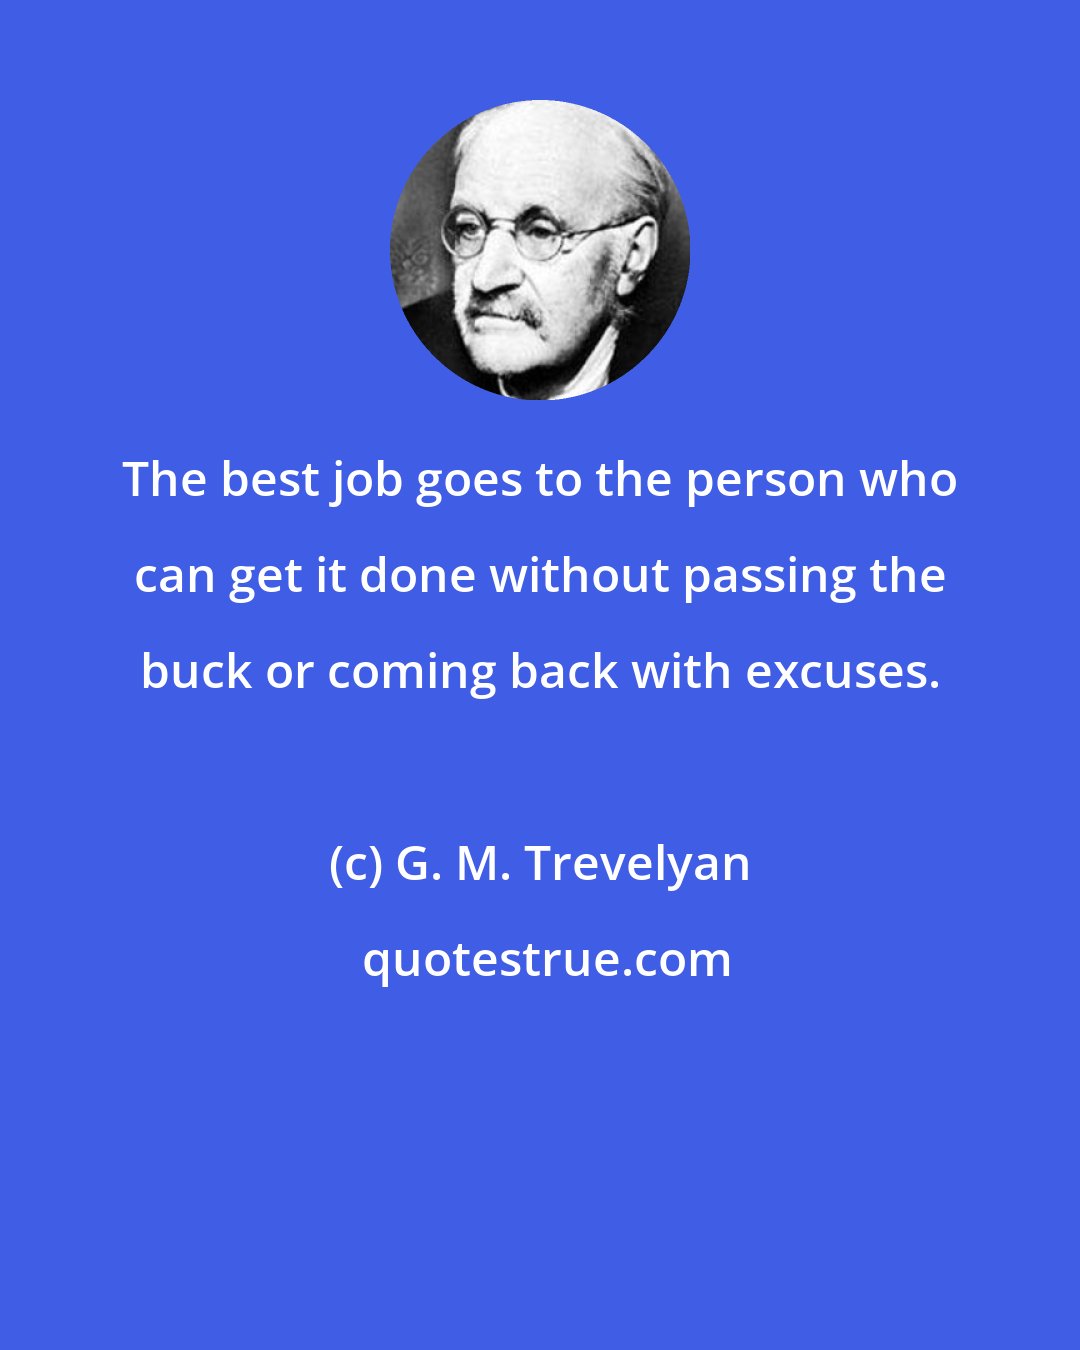 G. M. Trevelyan: The best job goes to the person who can get it done without passing the buck or coming back with excuses.